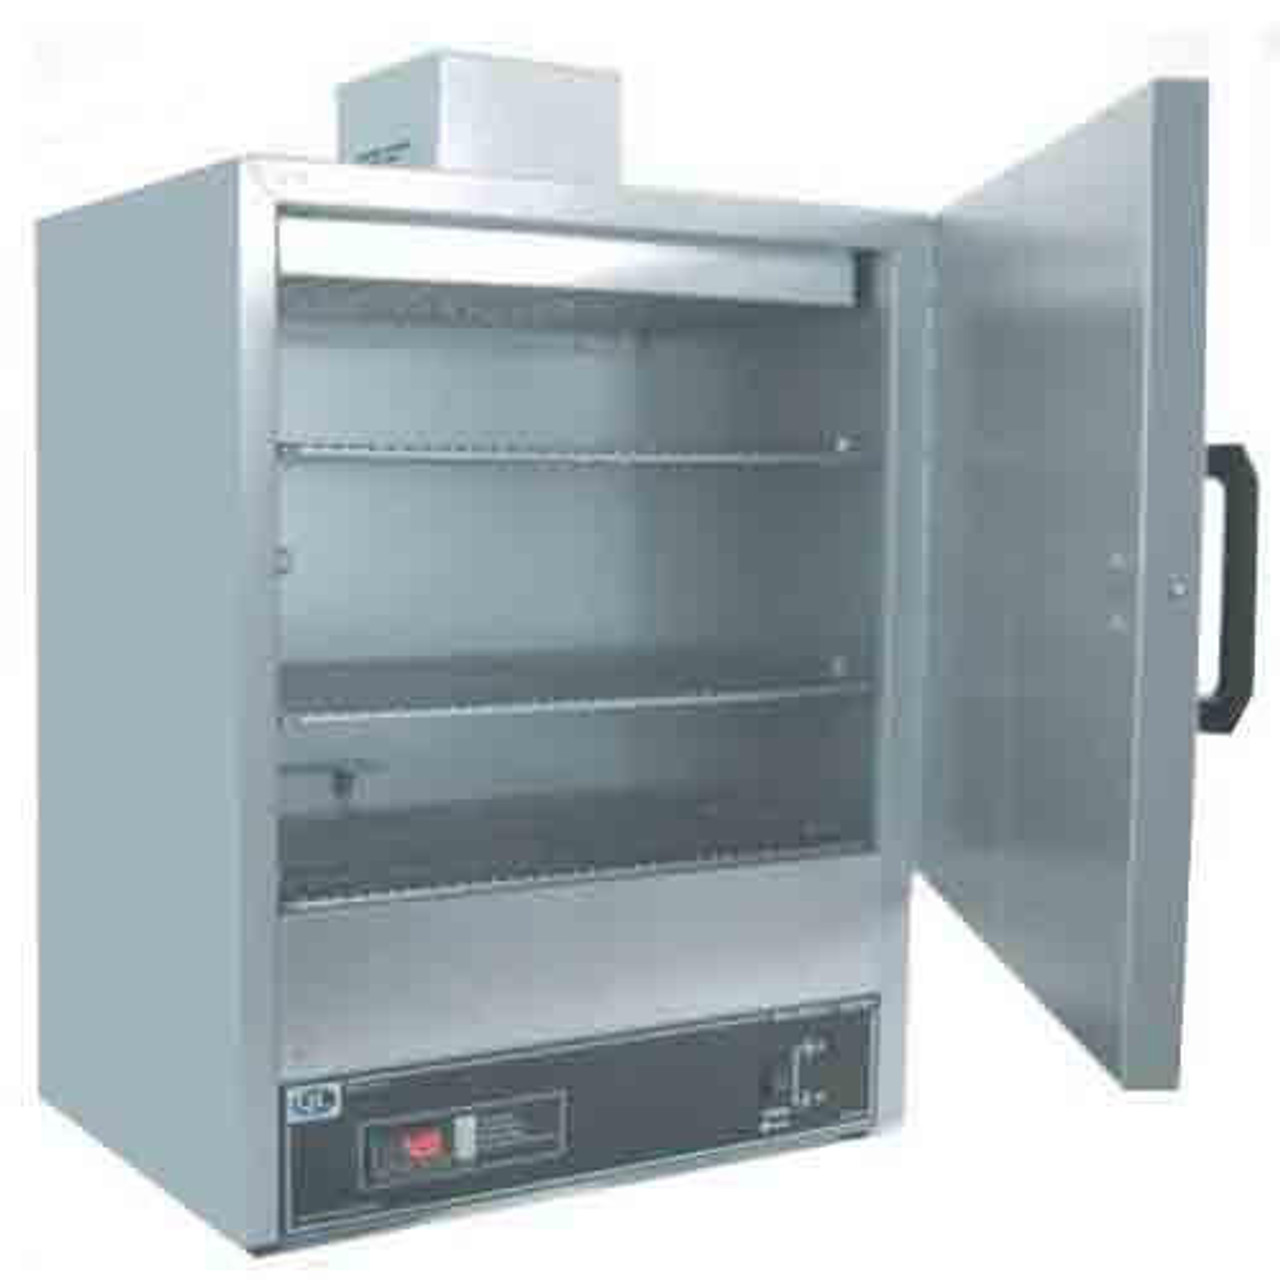 Grieve NB-350 Lab Bench Industrial Drying Oven, 208V, 350 Degree F, 7 cu  ft, Forced Air Convection